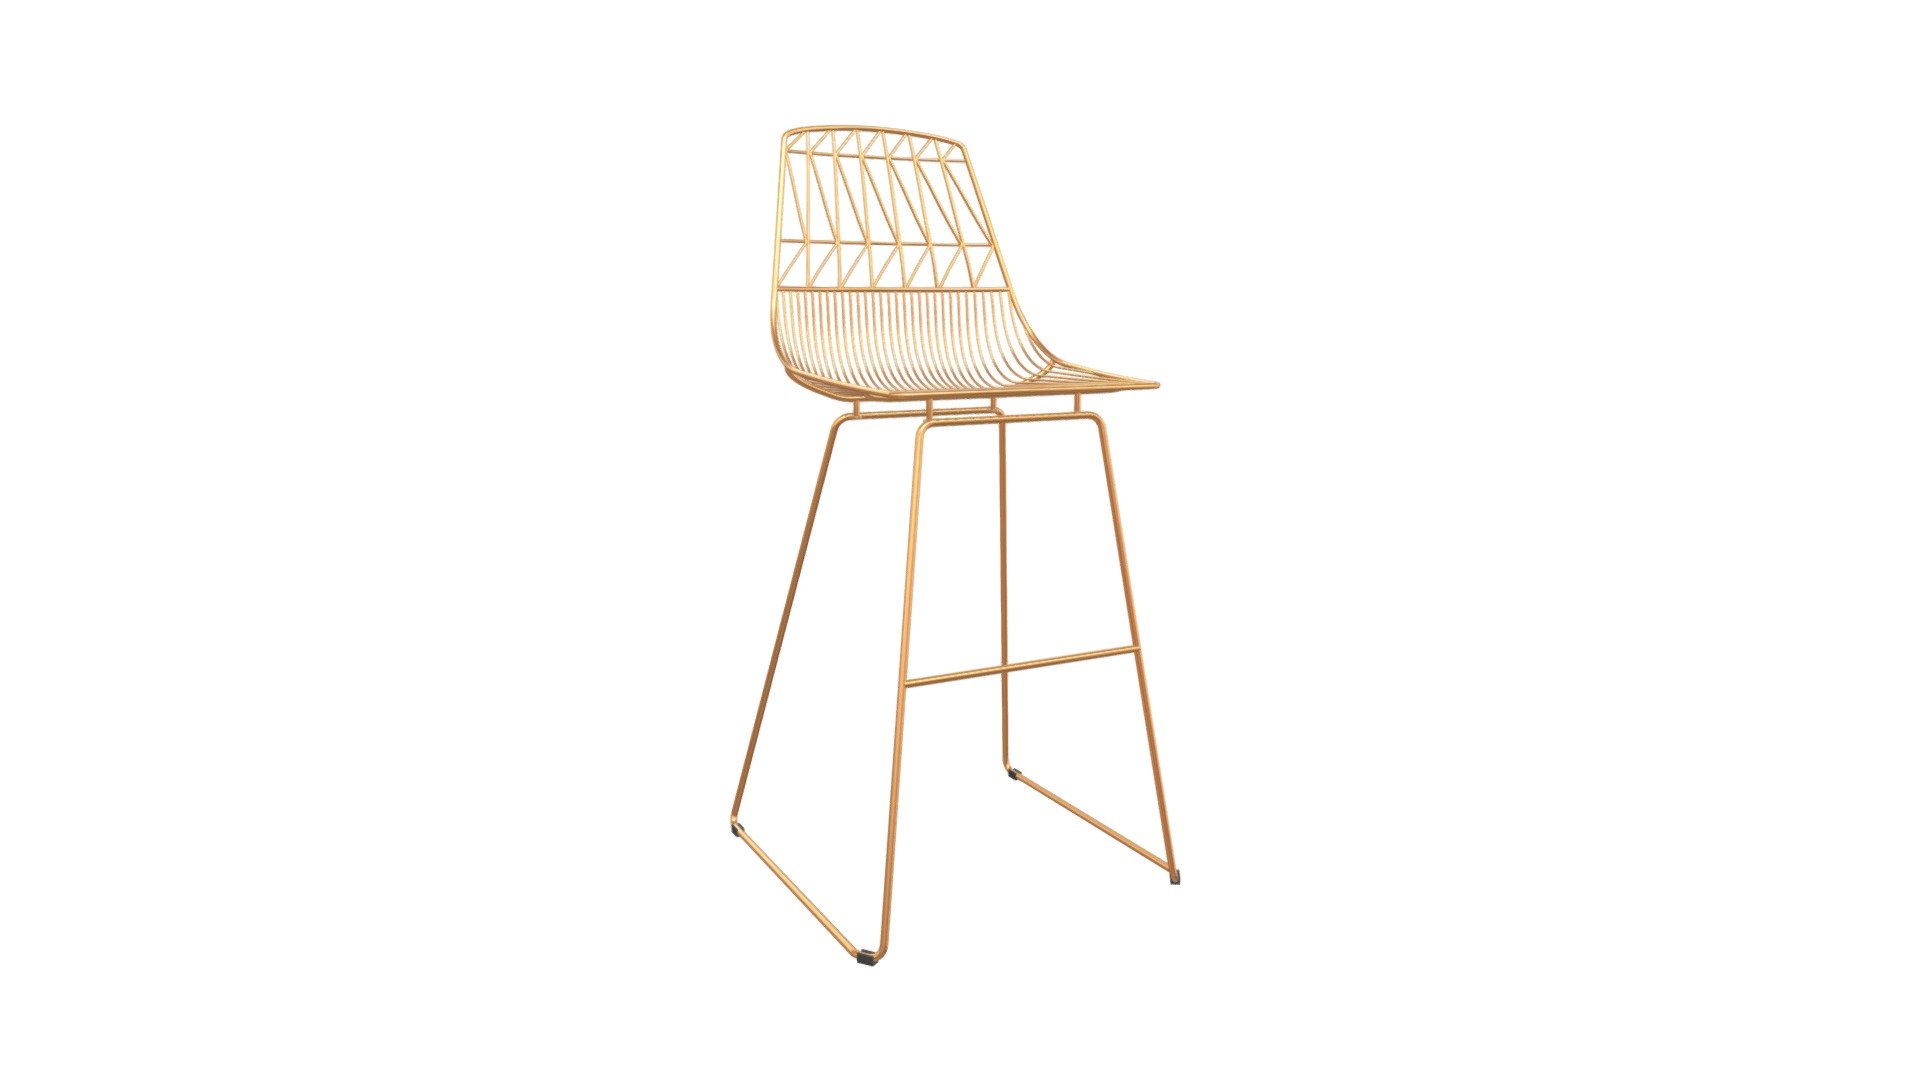 https://zuomod.com/brody-bar-chair-gold

Live wire. This sculptural bar chair is amped up with pattern and movement. Eye candy placed on your patio or deck, but also striking indoors. Its sleek style naturally compliments a modern kitchen island or bar table, but we also love the juxtaposition of it around a wood surface. Built to withstand the elements and add flair wherever it is placed 3d model